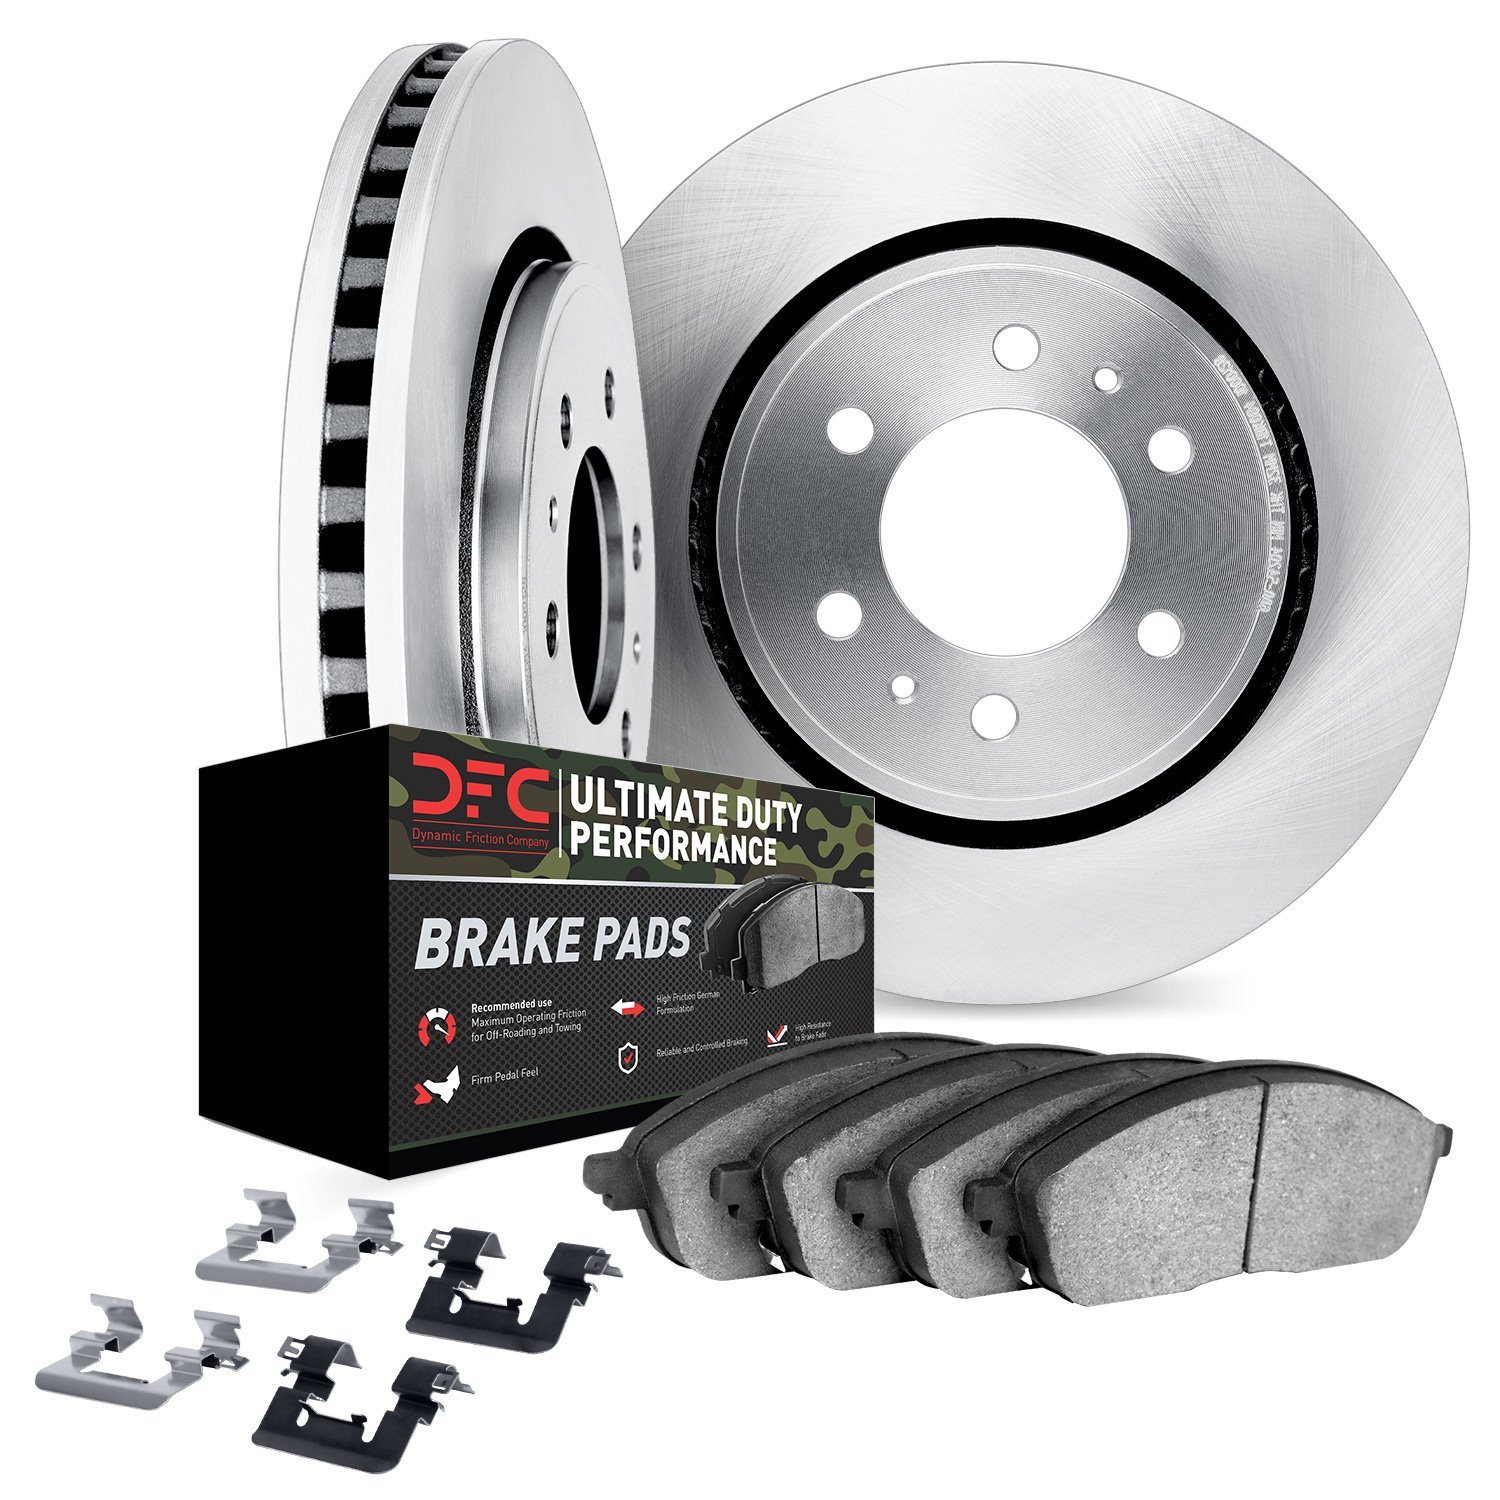 5412-67010 Slotted Brake Rotors with Ultimate-Duty Brake Pads Kit & Hardware [Silver], Fits Select Infiniti/Nissan, Position: Re